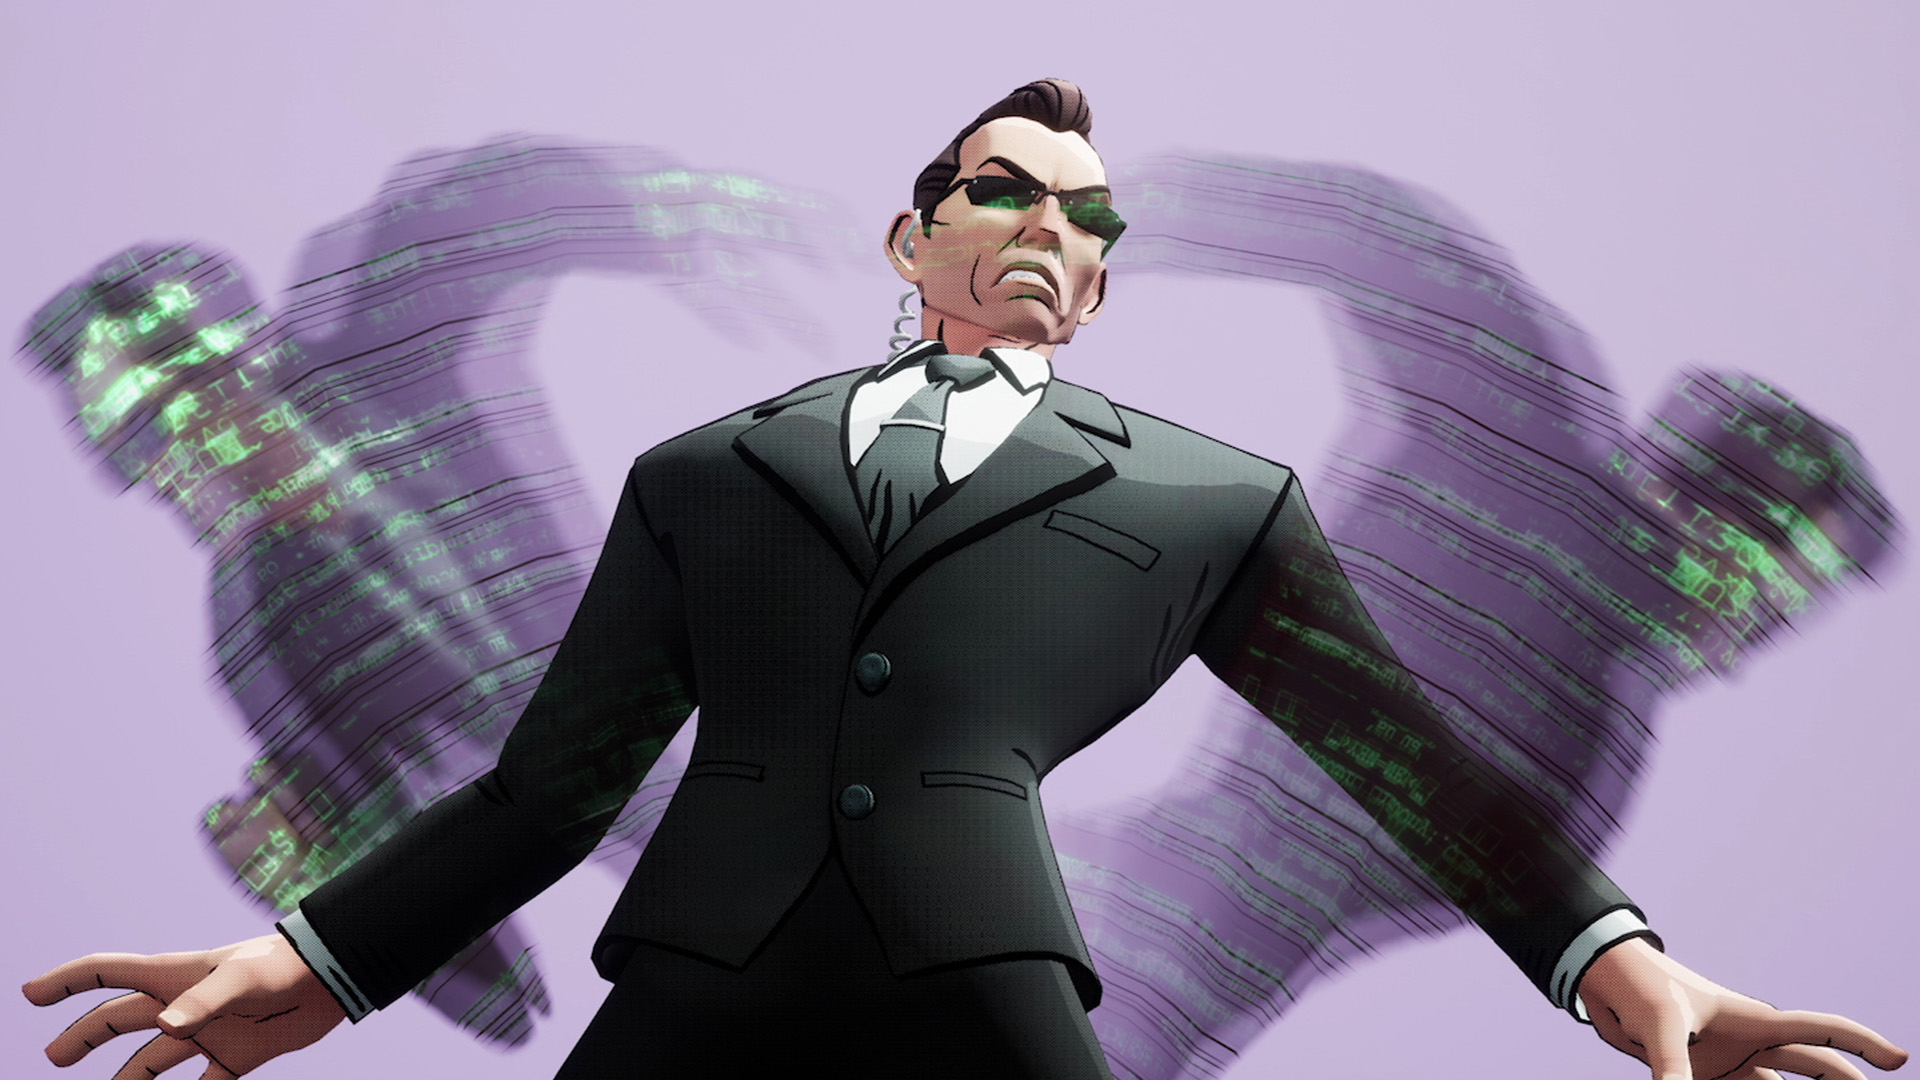 multiversus_agent_smith_feat